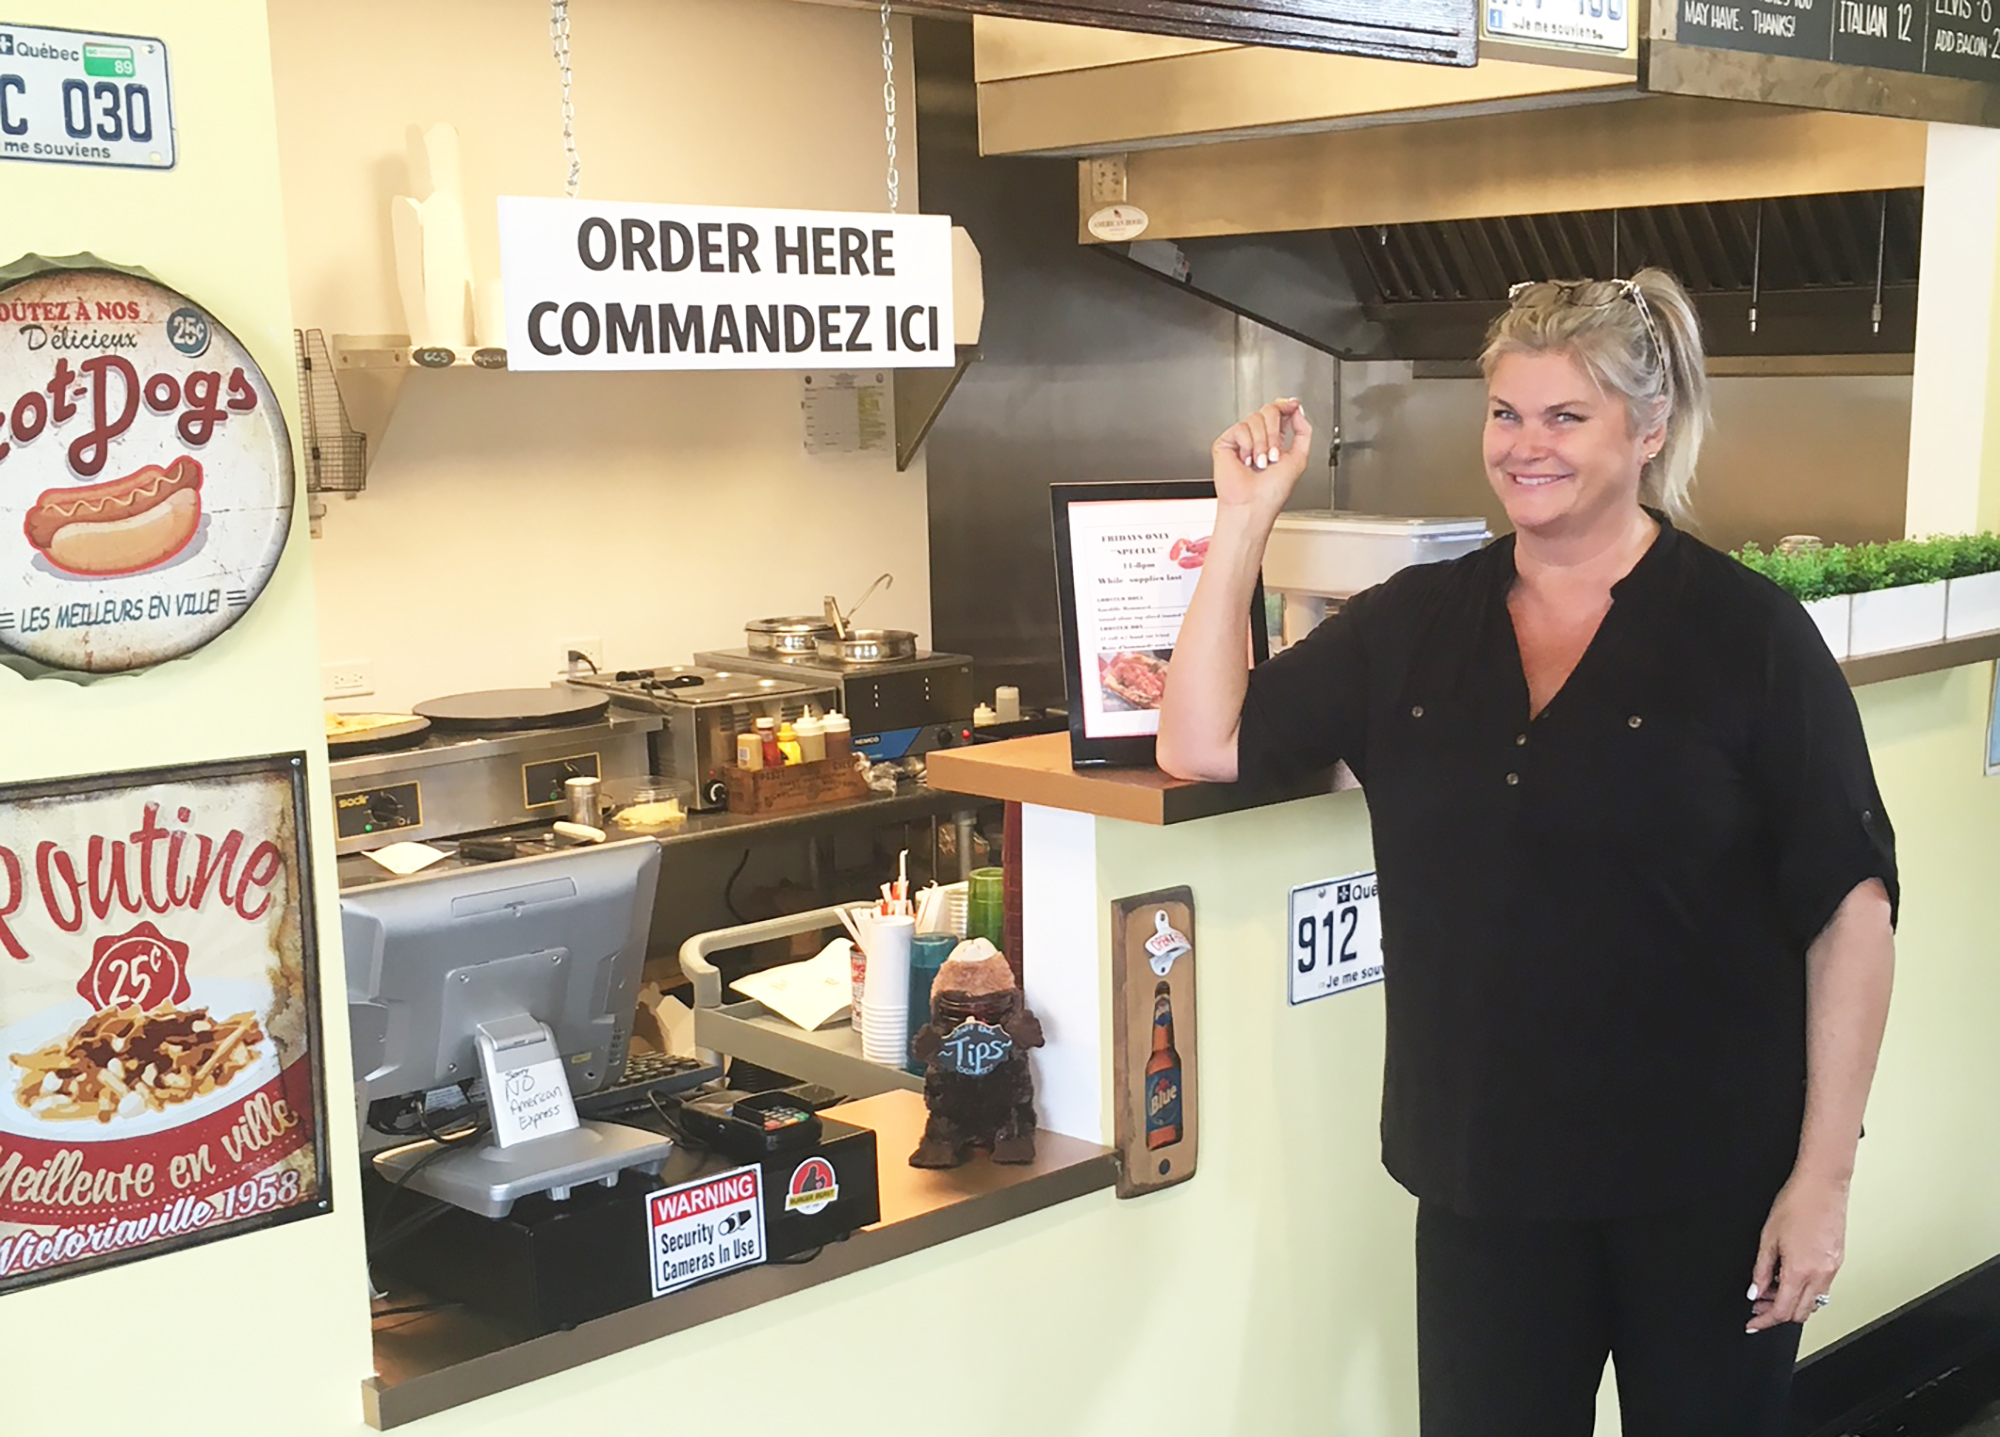 Paryse Watson, owner of the Full of Crepe food truck, opened The Stuffed Beaver restaurant at 2548 Oak St. in Riverside. She still has the food truck.